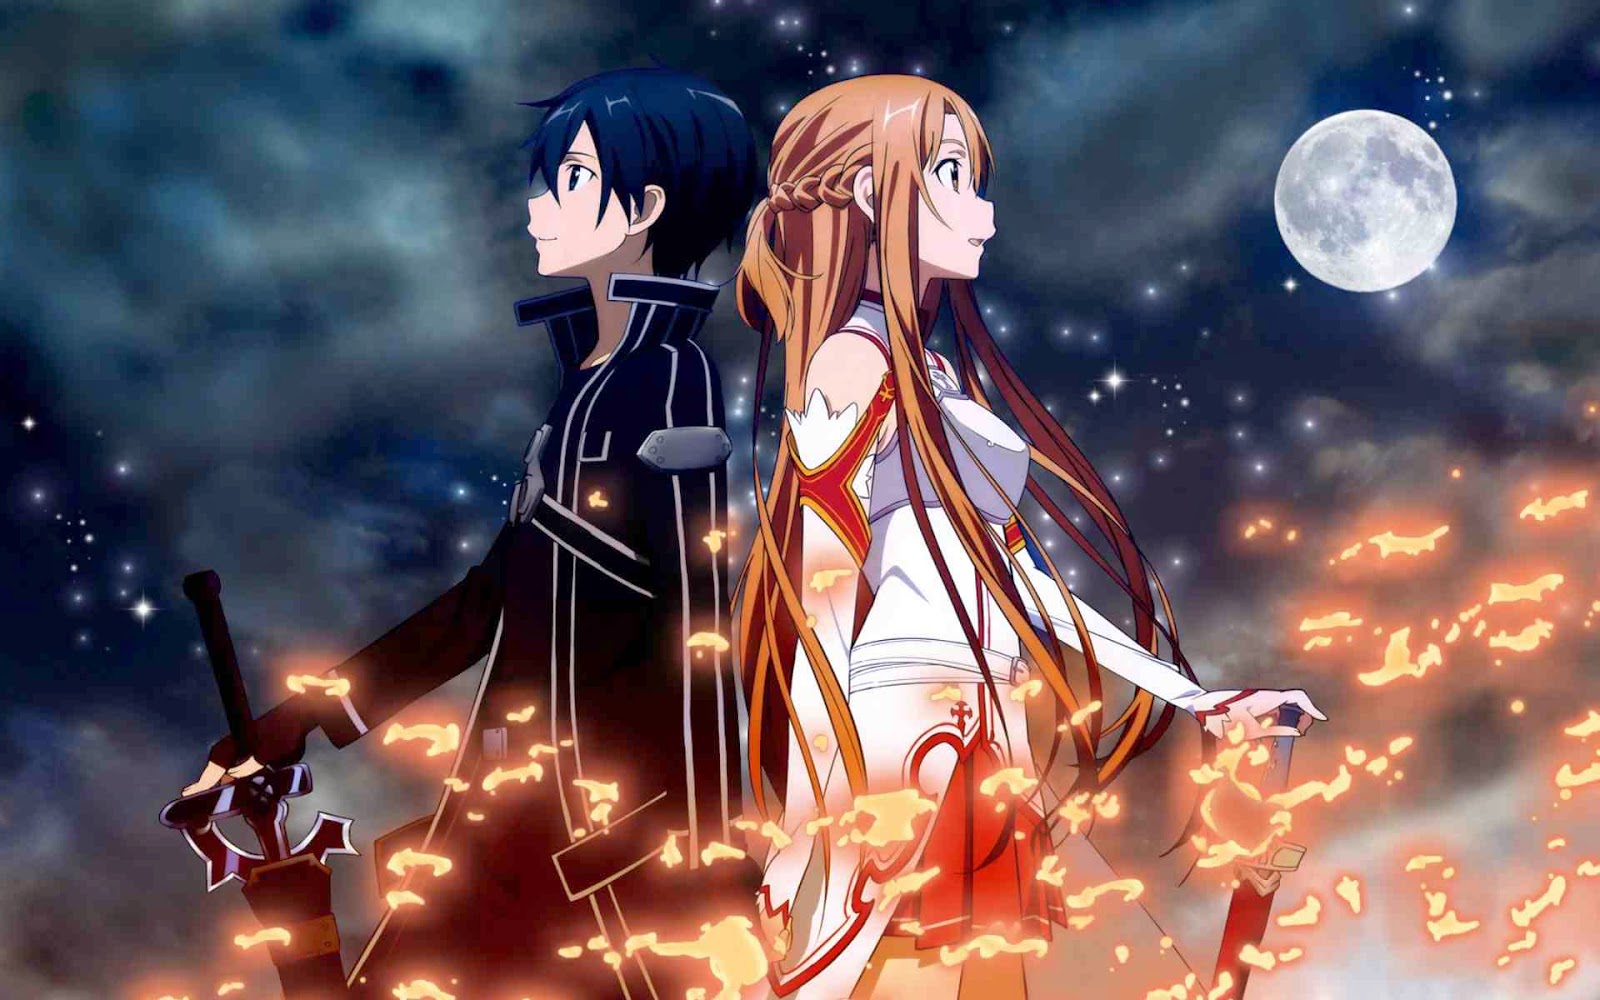 Every Sword Art Online Game Explained